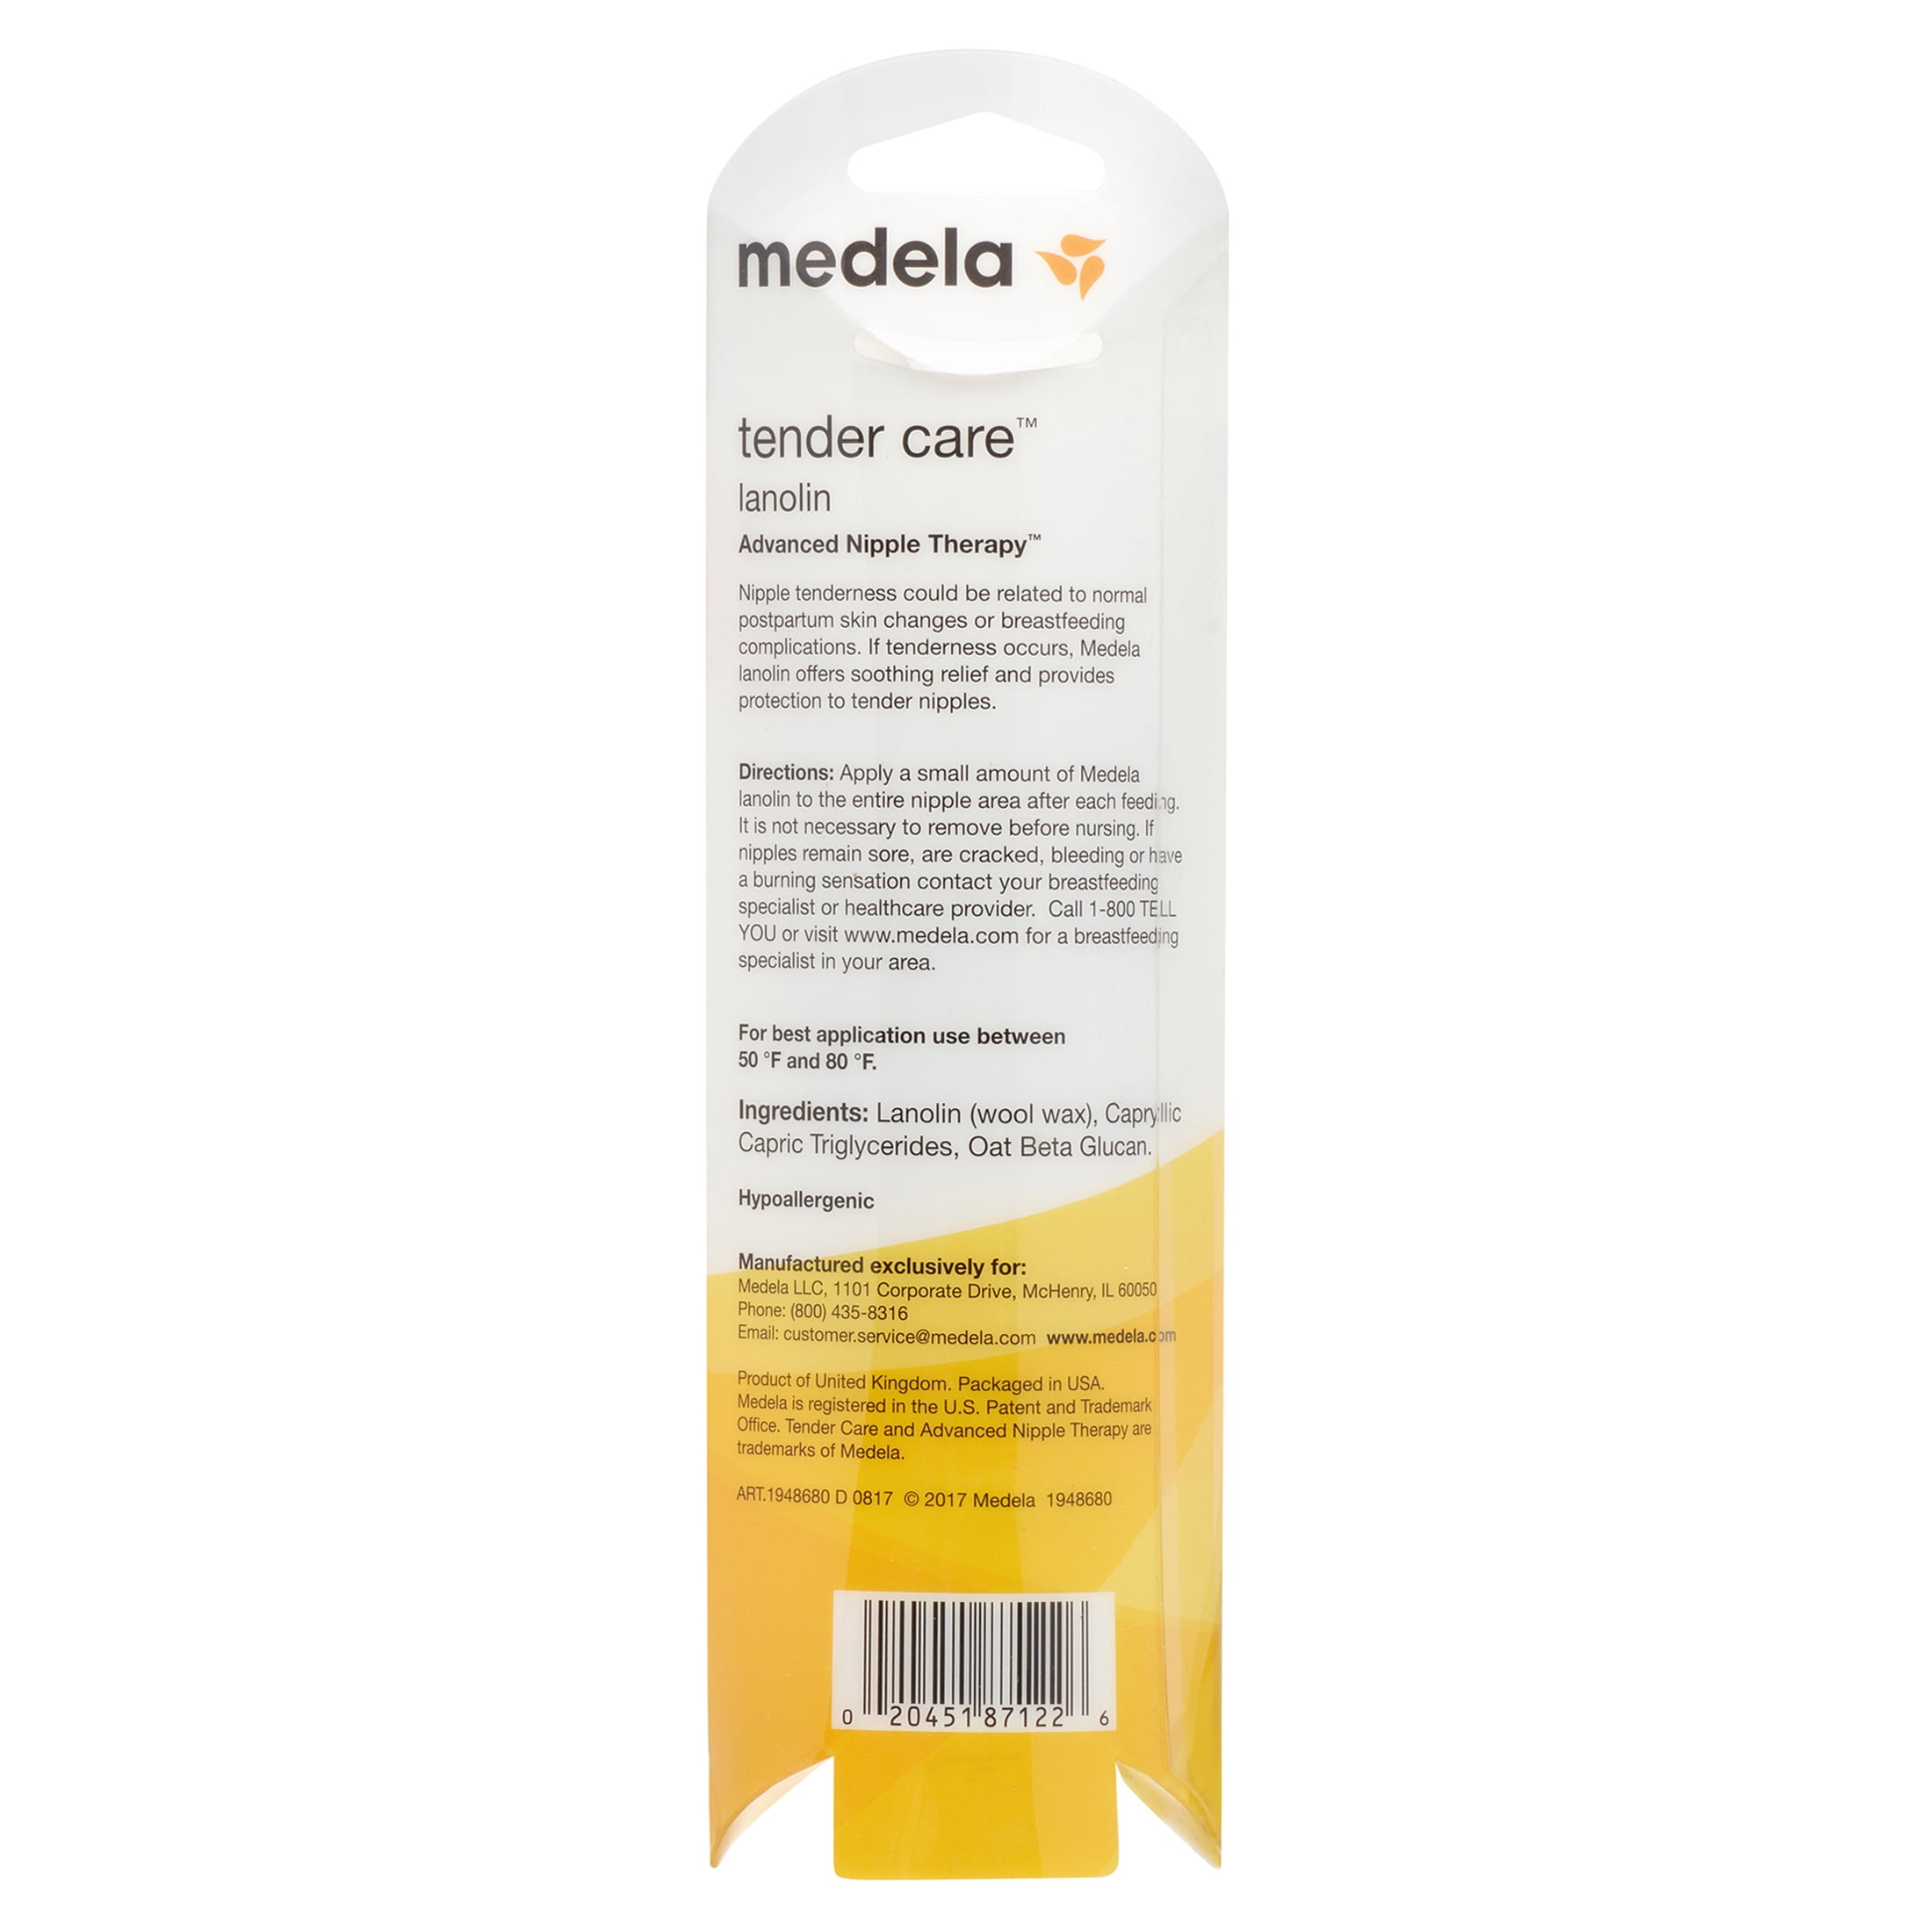  Medela Nipple Rescue Kit  Soothing Hydrogel Pads & Nipple  Cream for Breastfeeding, Includes 4 Ct Reusable Gel Pads & Purelan Lanolin,  Relief for Sore Nipples from Pumping/Nursing : Baby